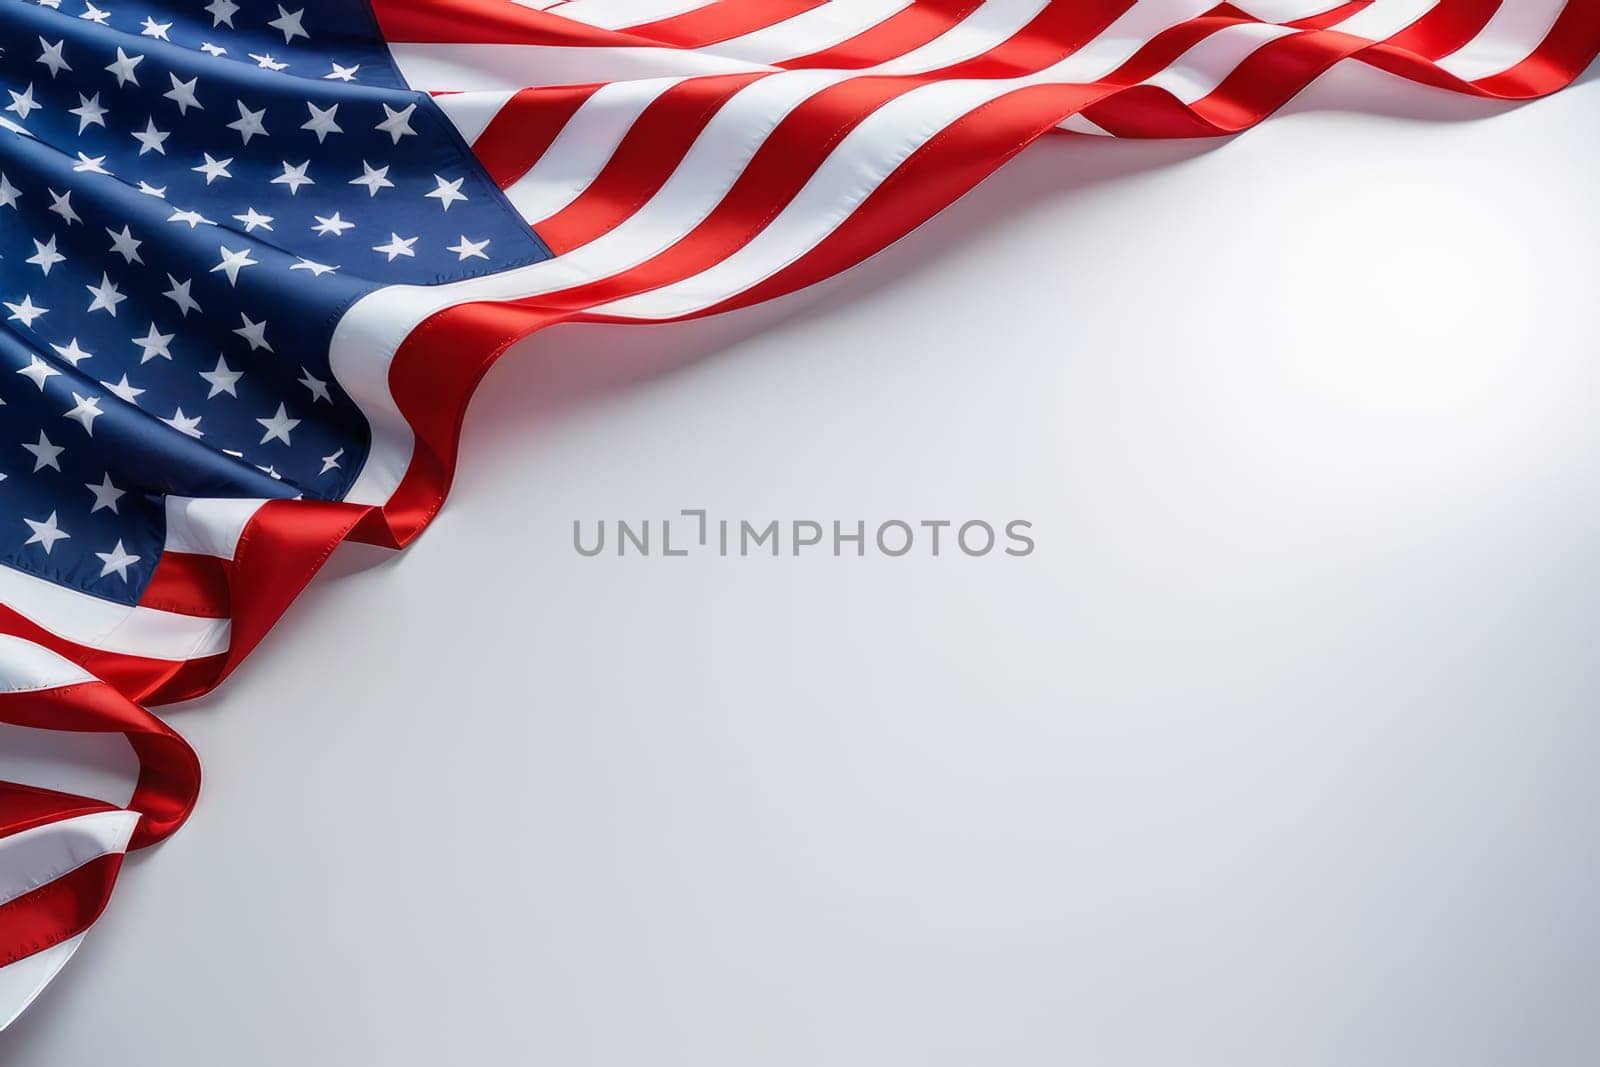 The close-up view of the American flag highlights its symbolic significance and historical importance, evoking a sense of unity and liberty